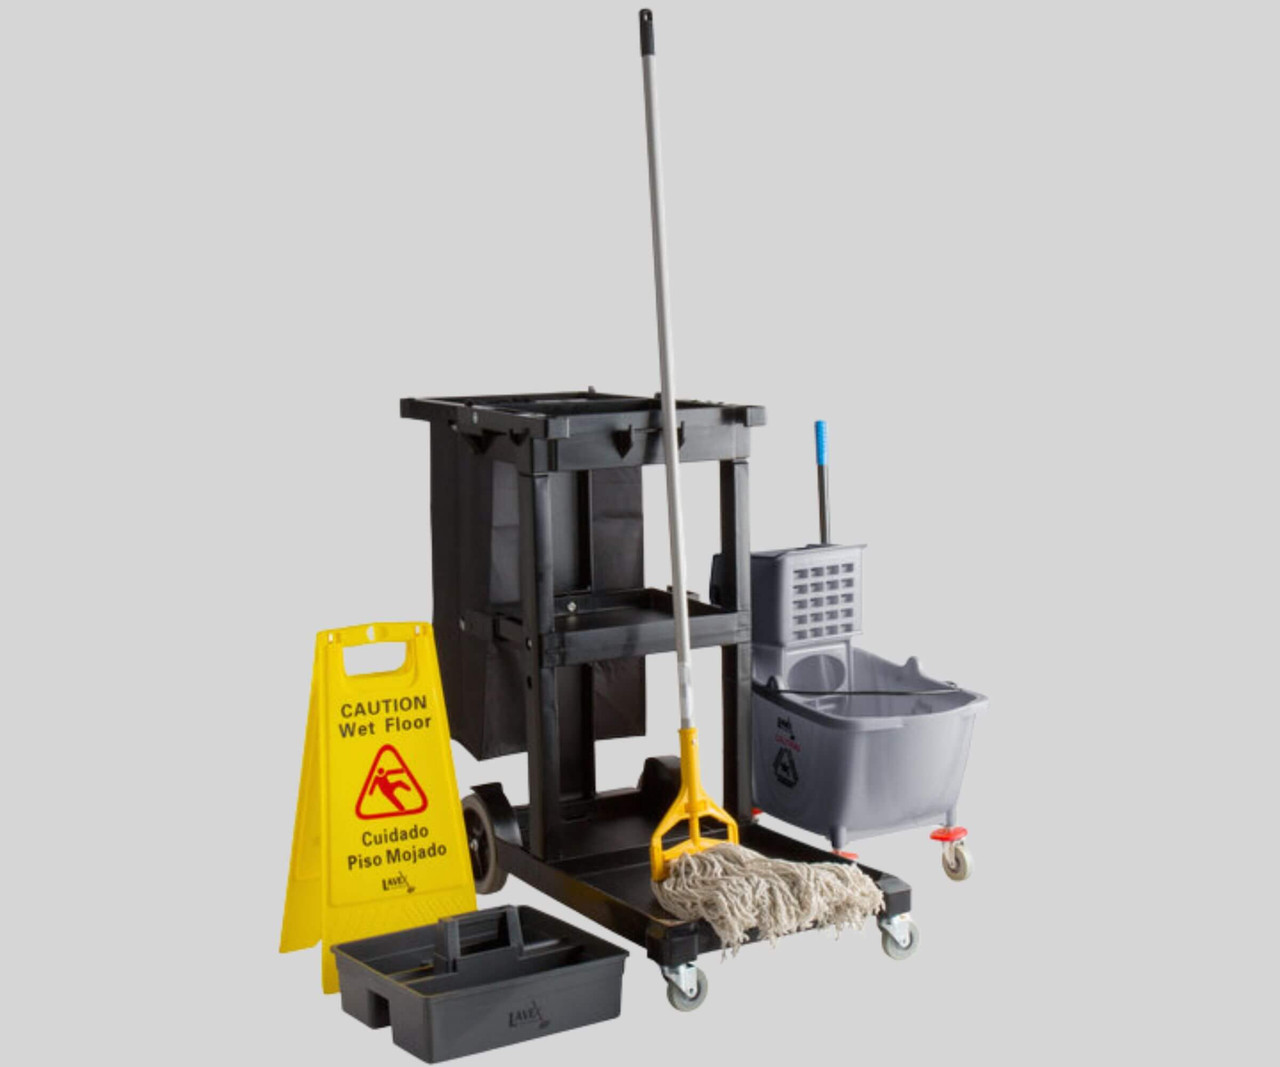 CP Janitorial Black Cleaning / Janitor Cart Kit with Gray Mop Bucket, Wet Floor Sign, Mop, and Caddy-Chicken Pieces